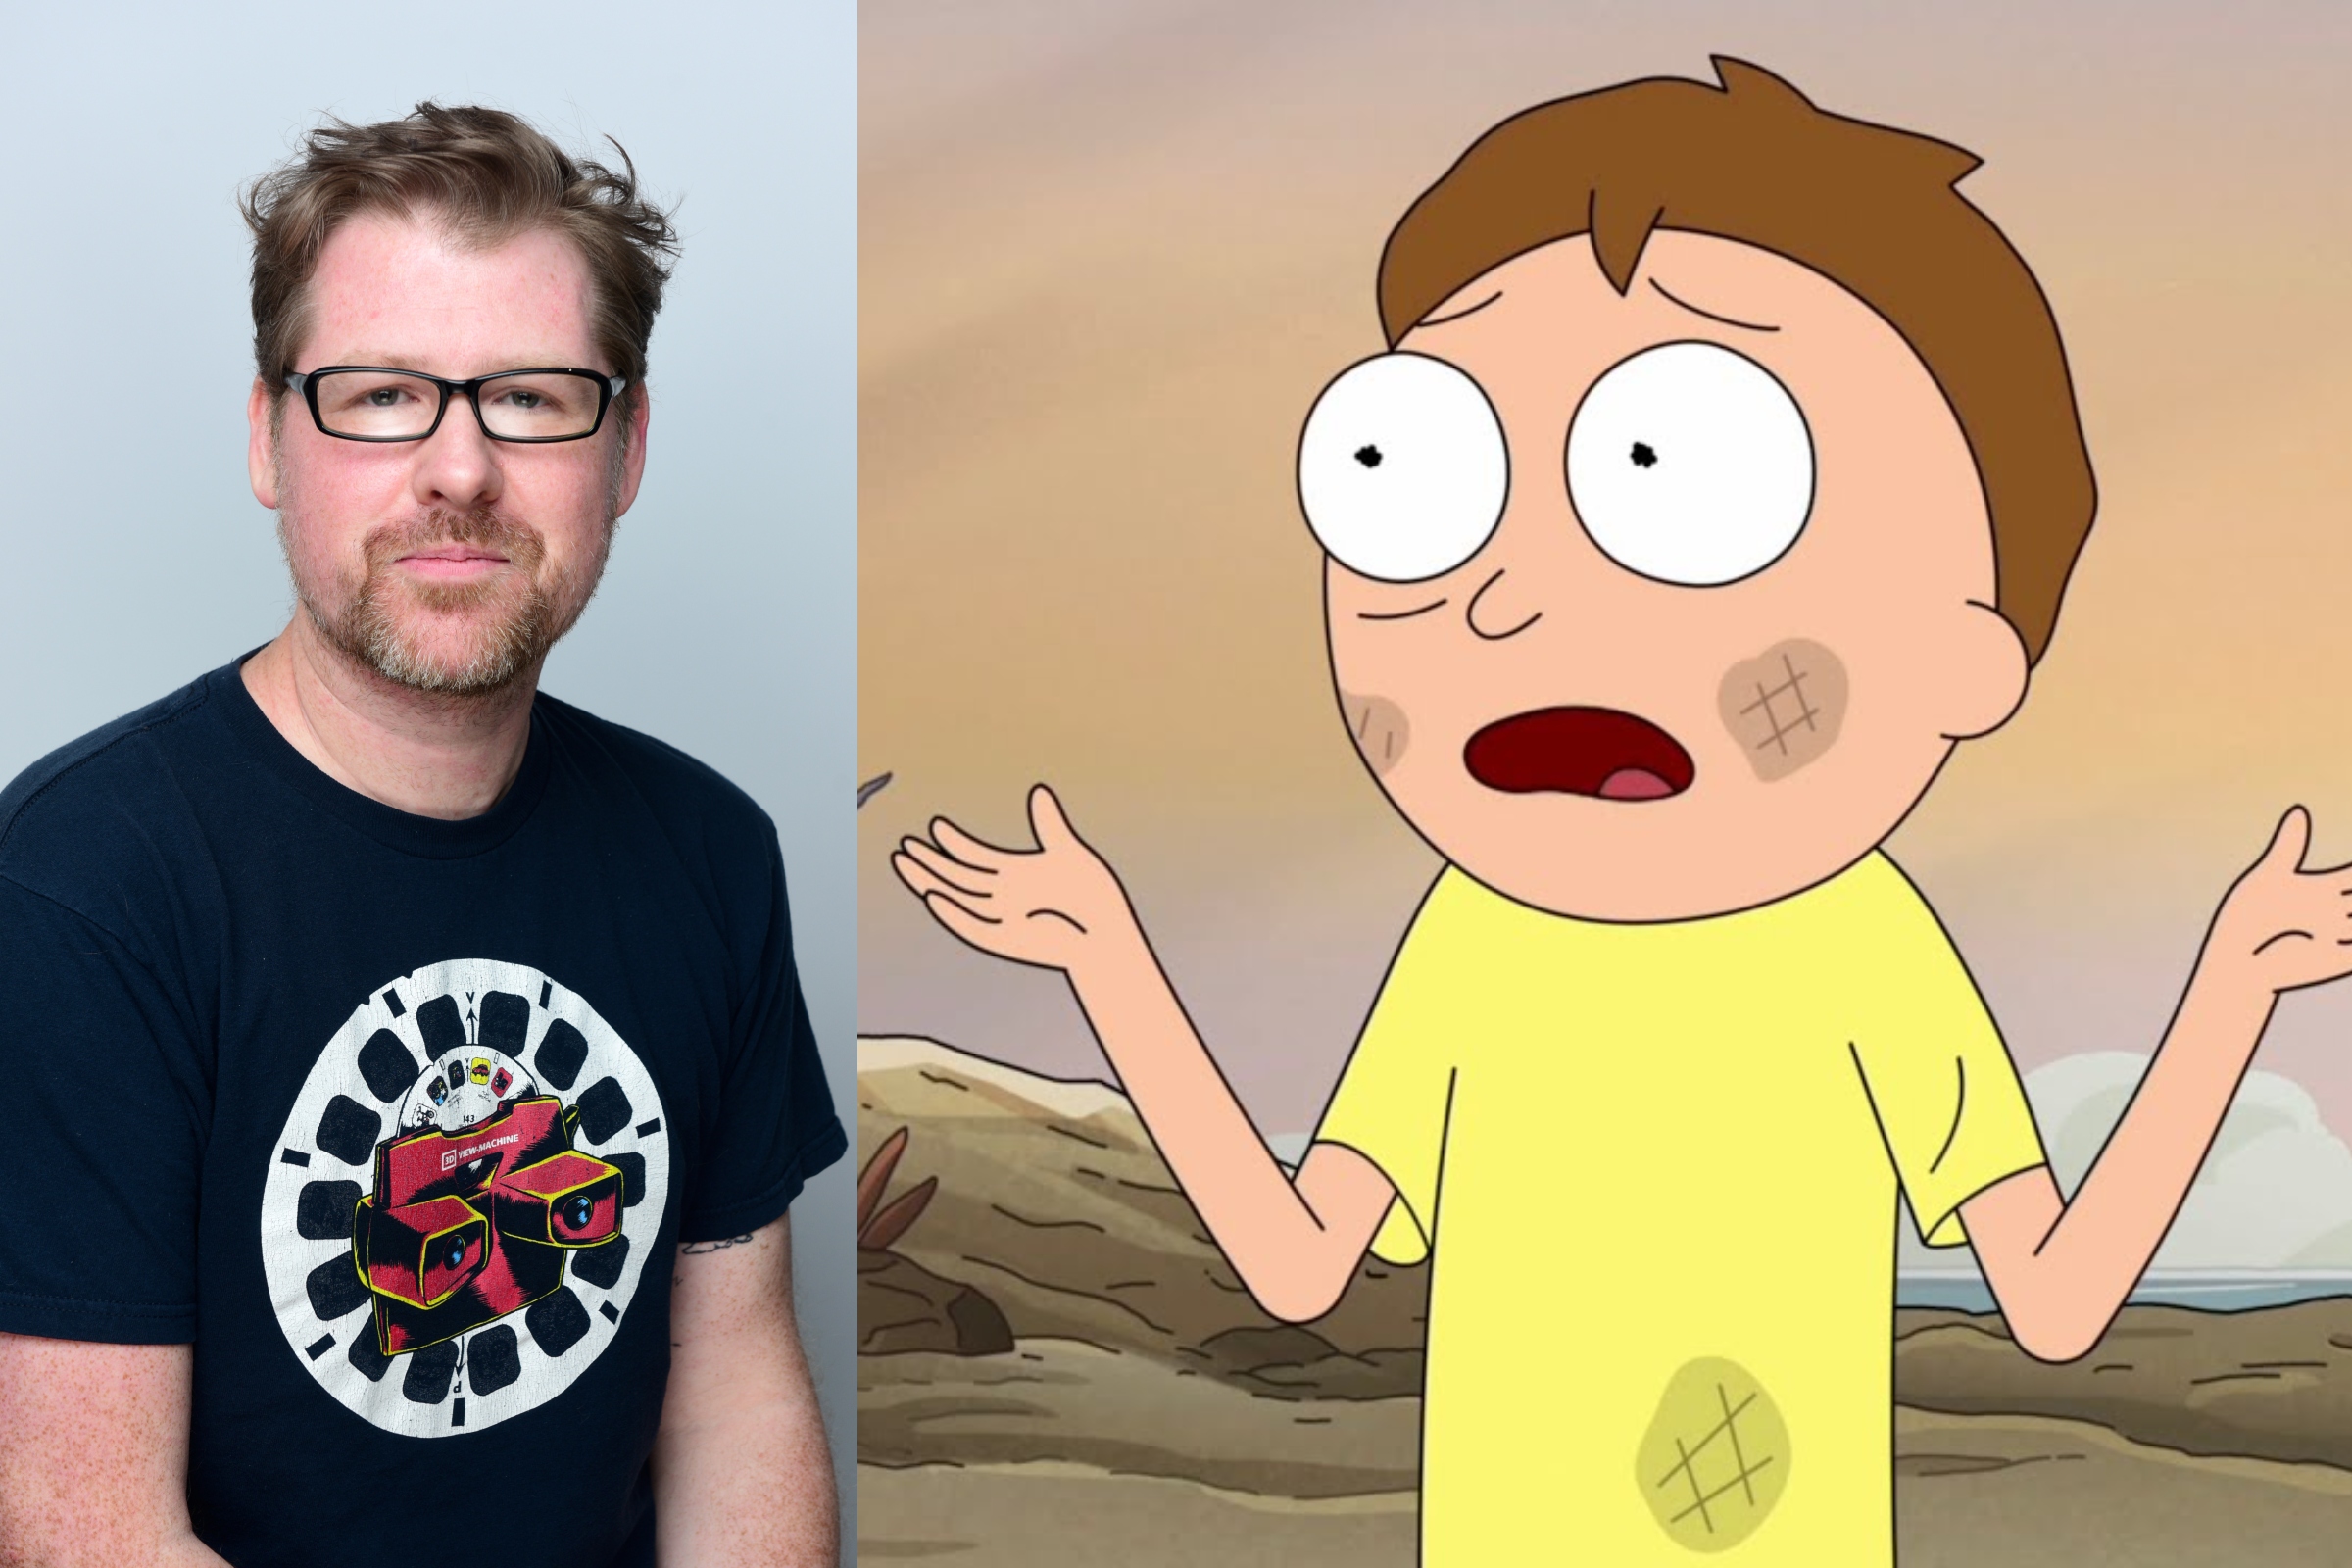 Rick and Morty Fans Divided After Adult Swim Cuts Ties With Justin Roiland